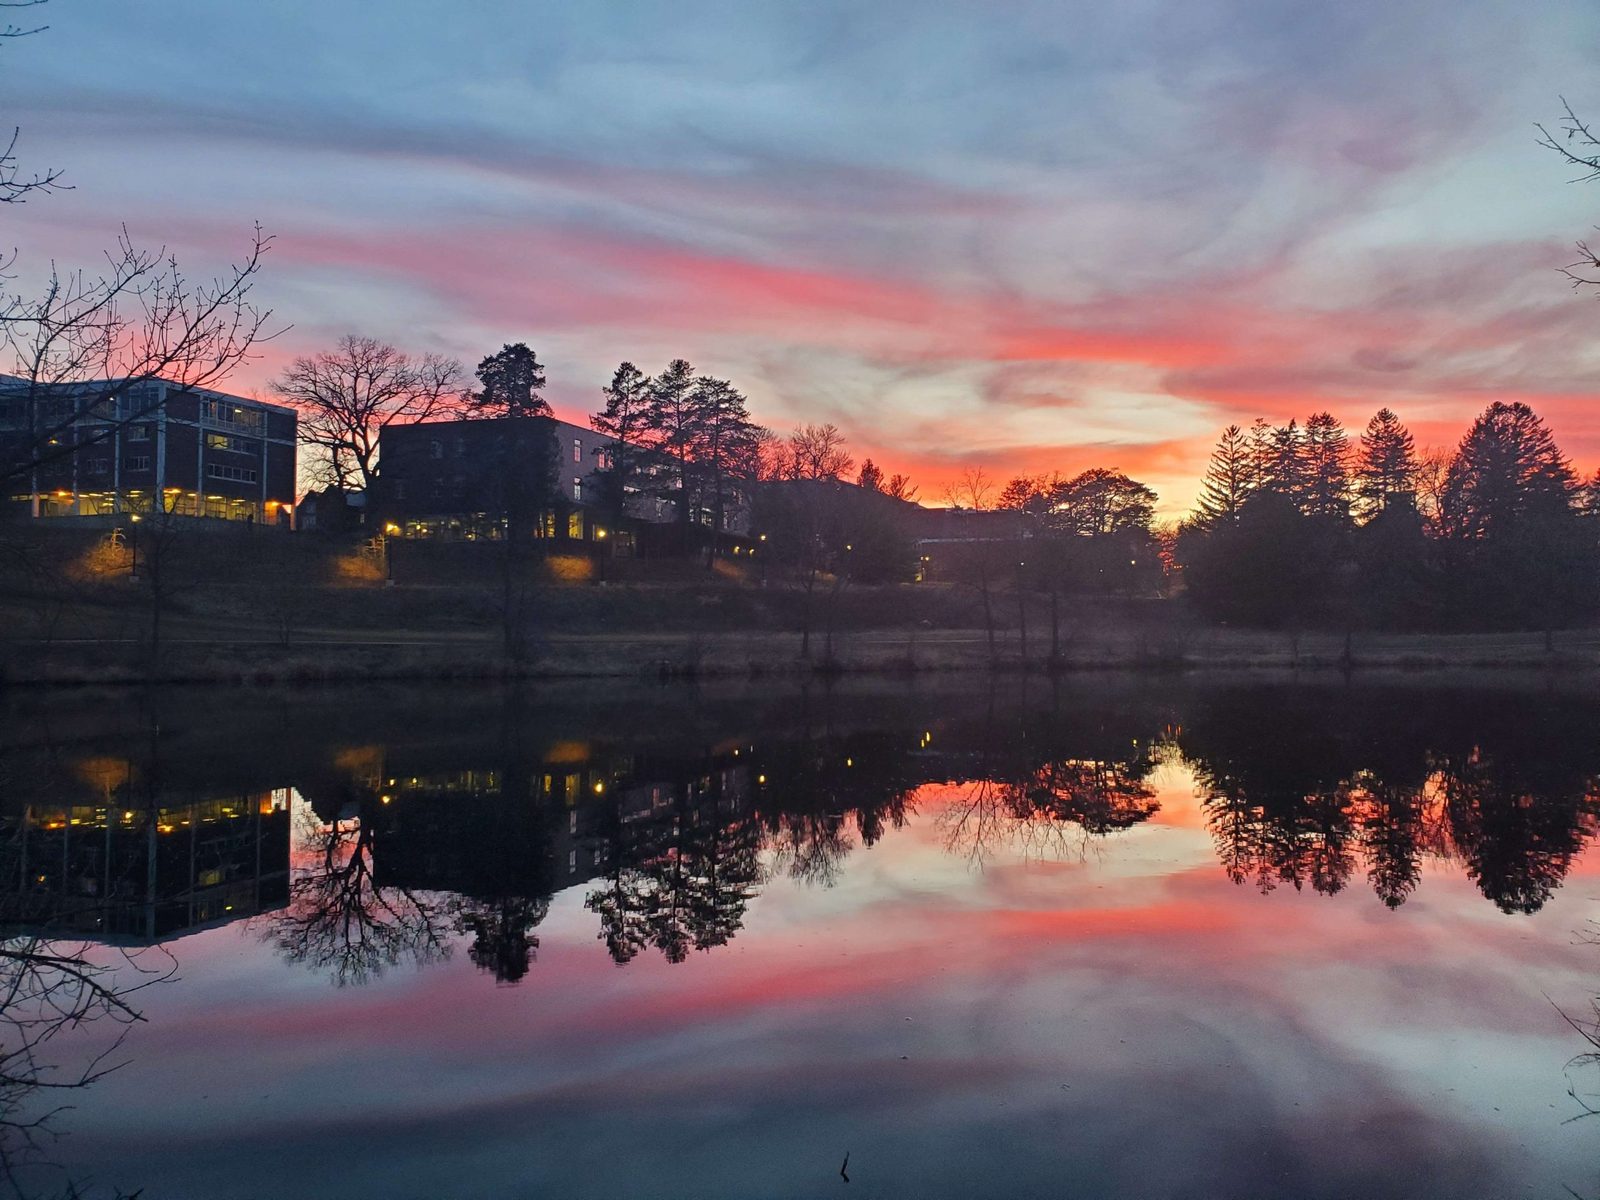 A picturesque sunset reflected over the Lyman Lakes.